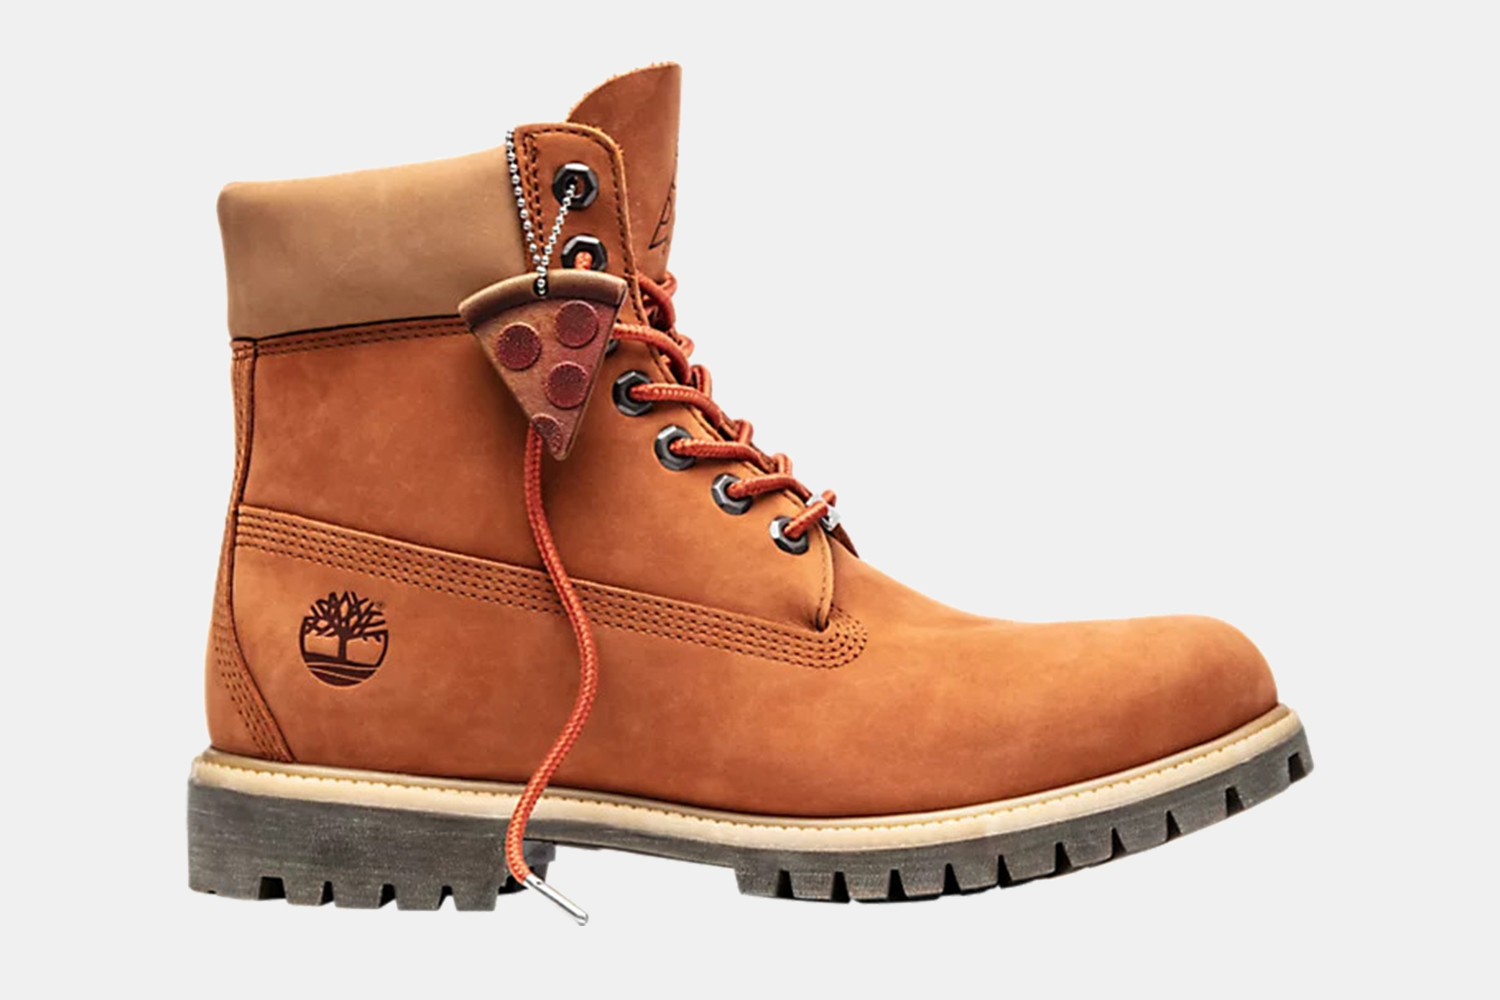 Timberland Limited-Edition Pizza Food Truck Boots